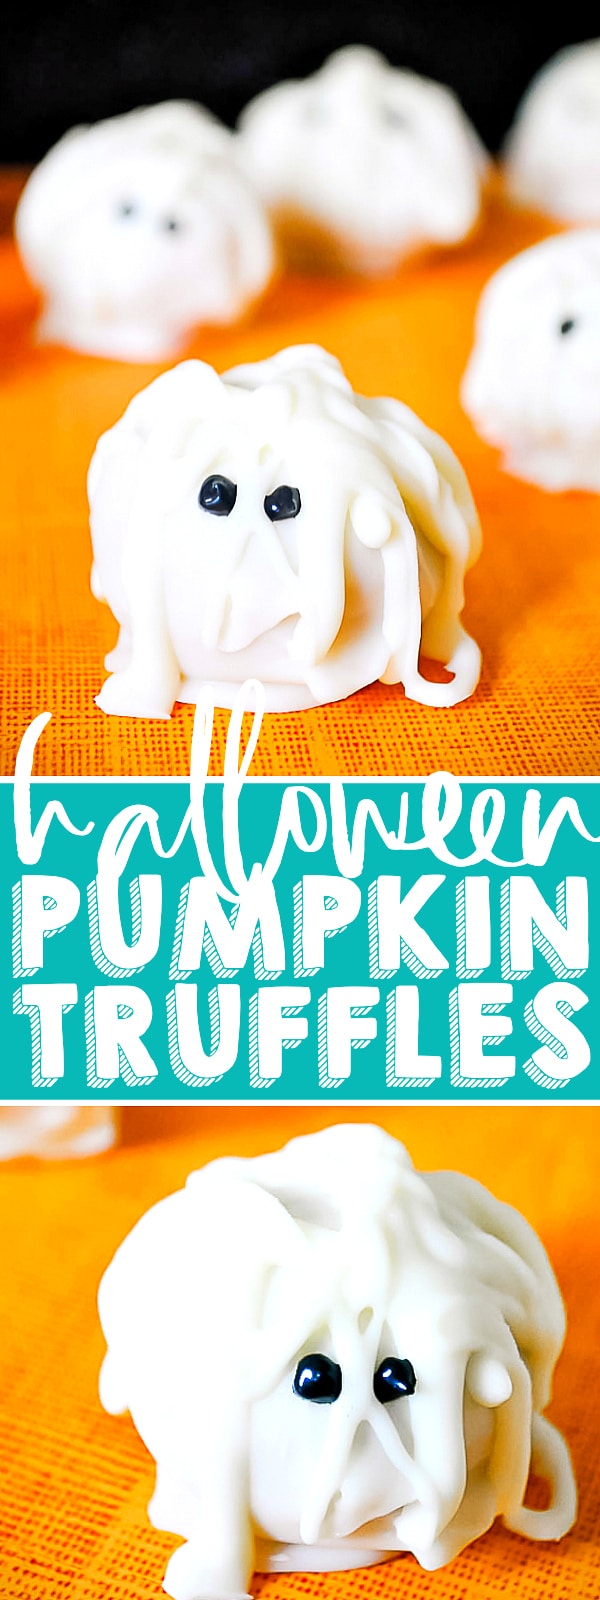 Looking for a spooktacular Halloween treat?! These Spiced Pumpkin Truffles will be a huge crowd pleaser and can easily be decorated as mummies! Want to enjoy for Thanksgiving - skip the mummy decor! The pumpkin truffles will be loved either way! | The Love Nerds #halloweendessert #pumpkinrecipe #trufflerecipe